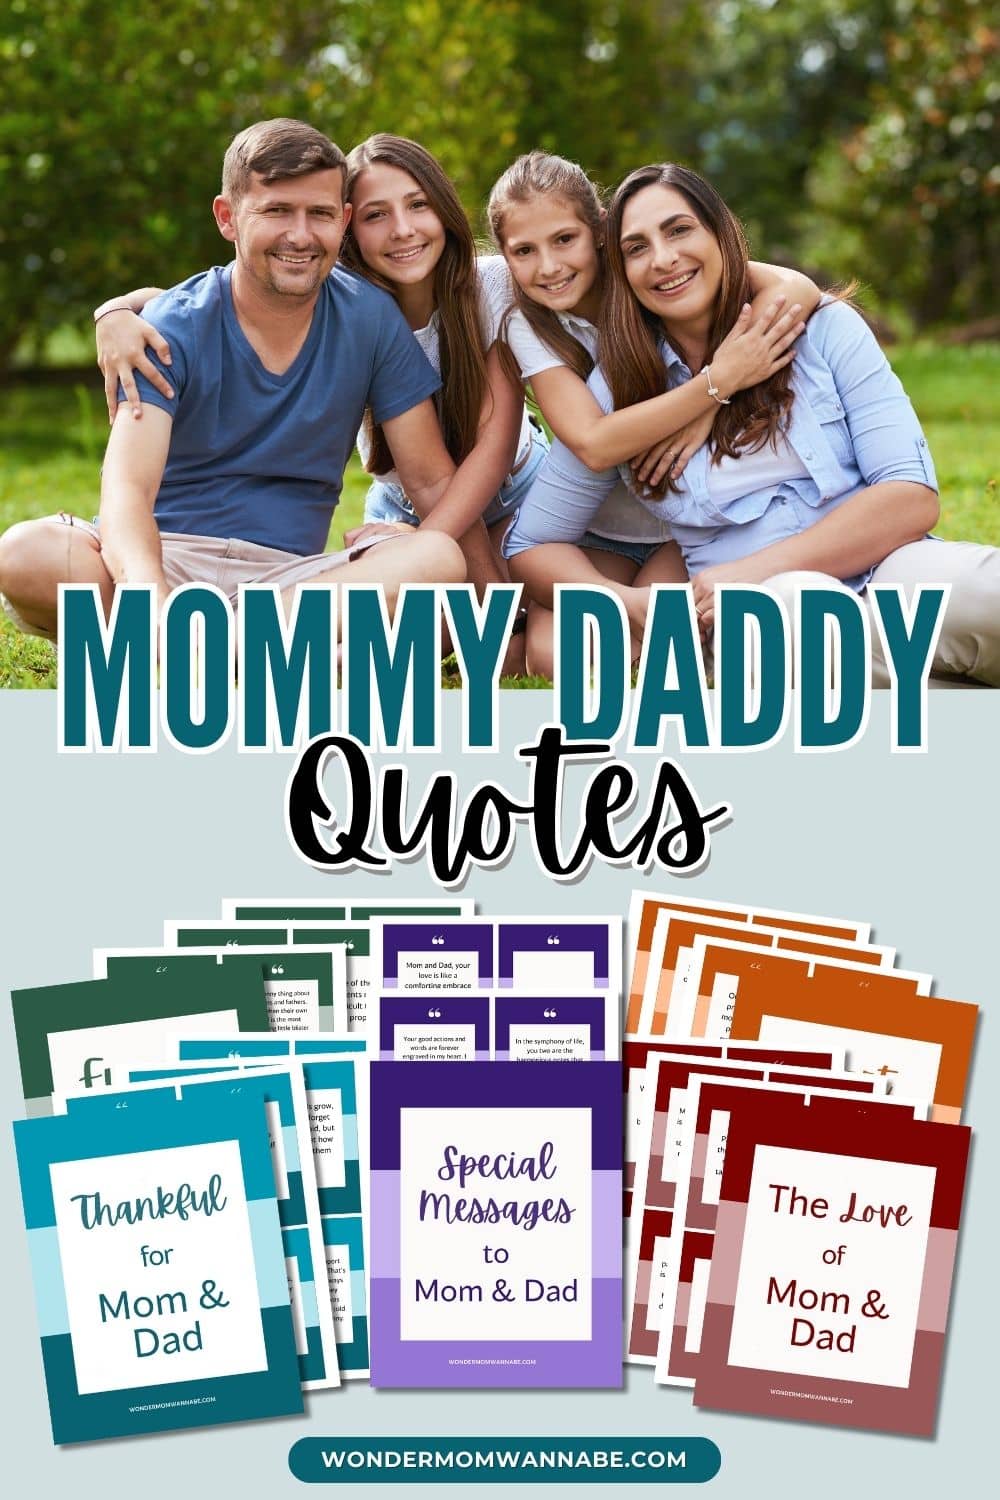 Looking for some heartwarming mommy daddy quotes? Look no further!